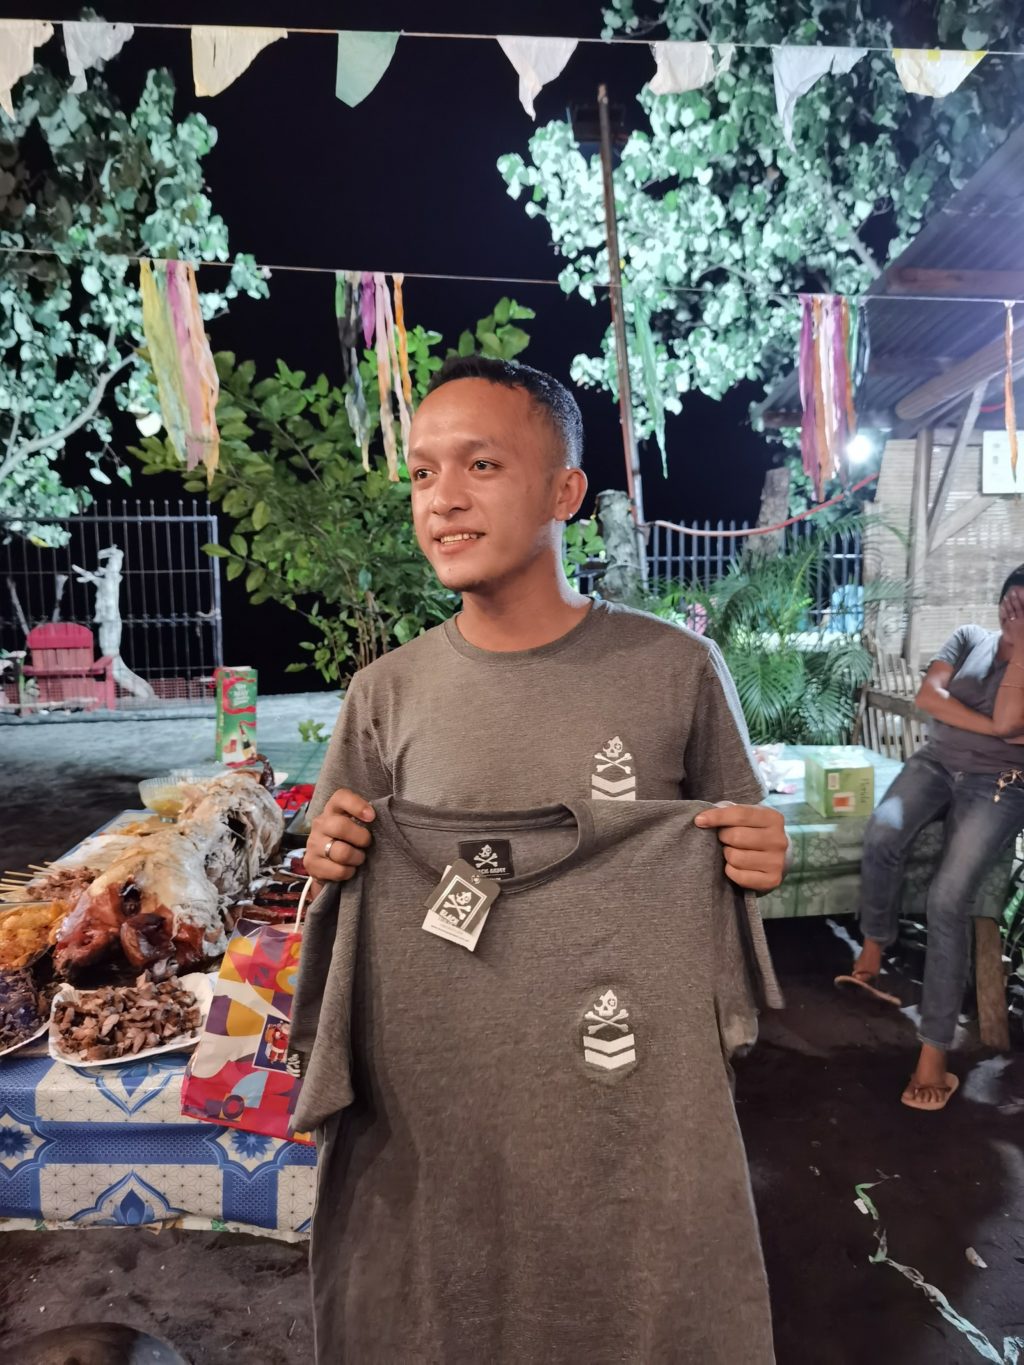 It’s a 'not-so-surprise' Christmas present in Bukidnon! Jaymart Cosina holds up the shirt that he received at the Christmas party's exchange gift portion -- a similar t-shirt that he was wearing that night of the party. | Contributed photo